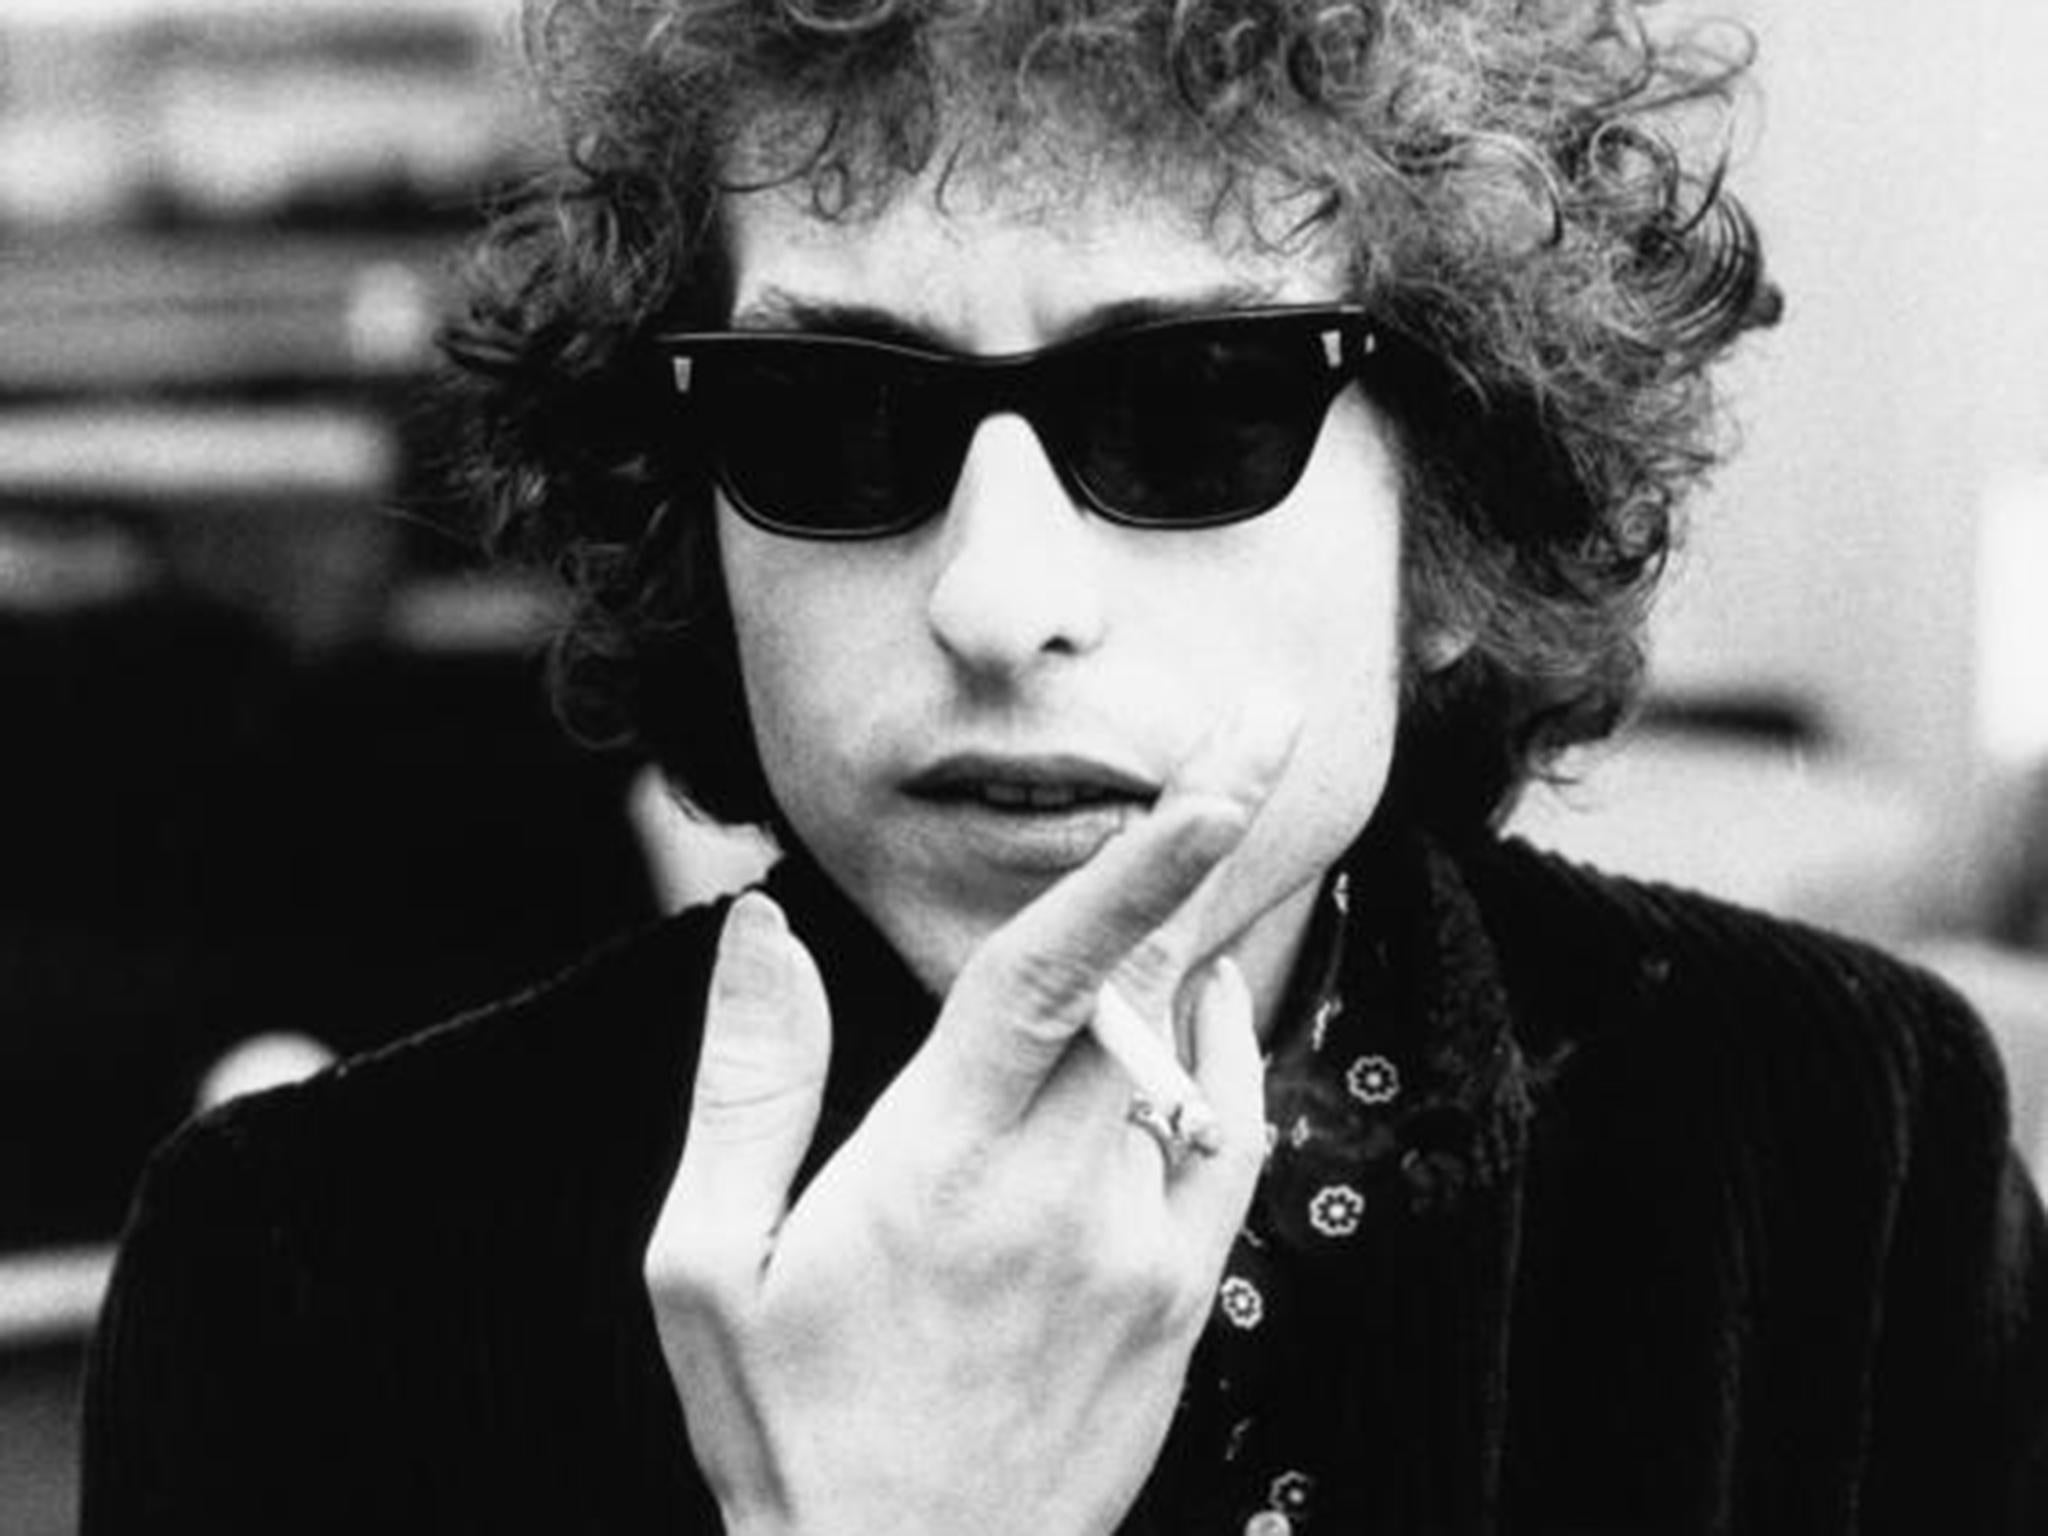 Bob Dylan was awarded the Nobel Prize for Literature this week